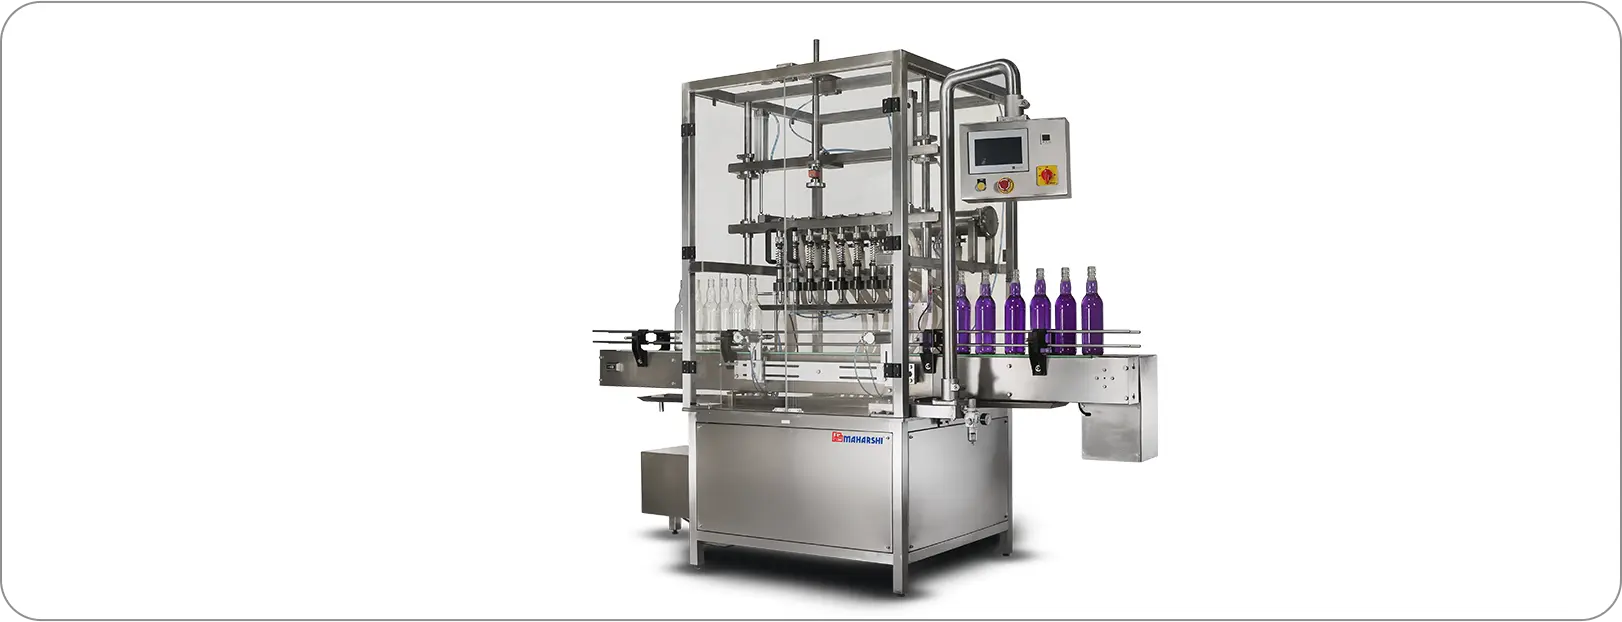 Advanced Level Filling Machine - Elevate Your Bottle Filling Process